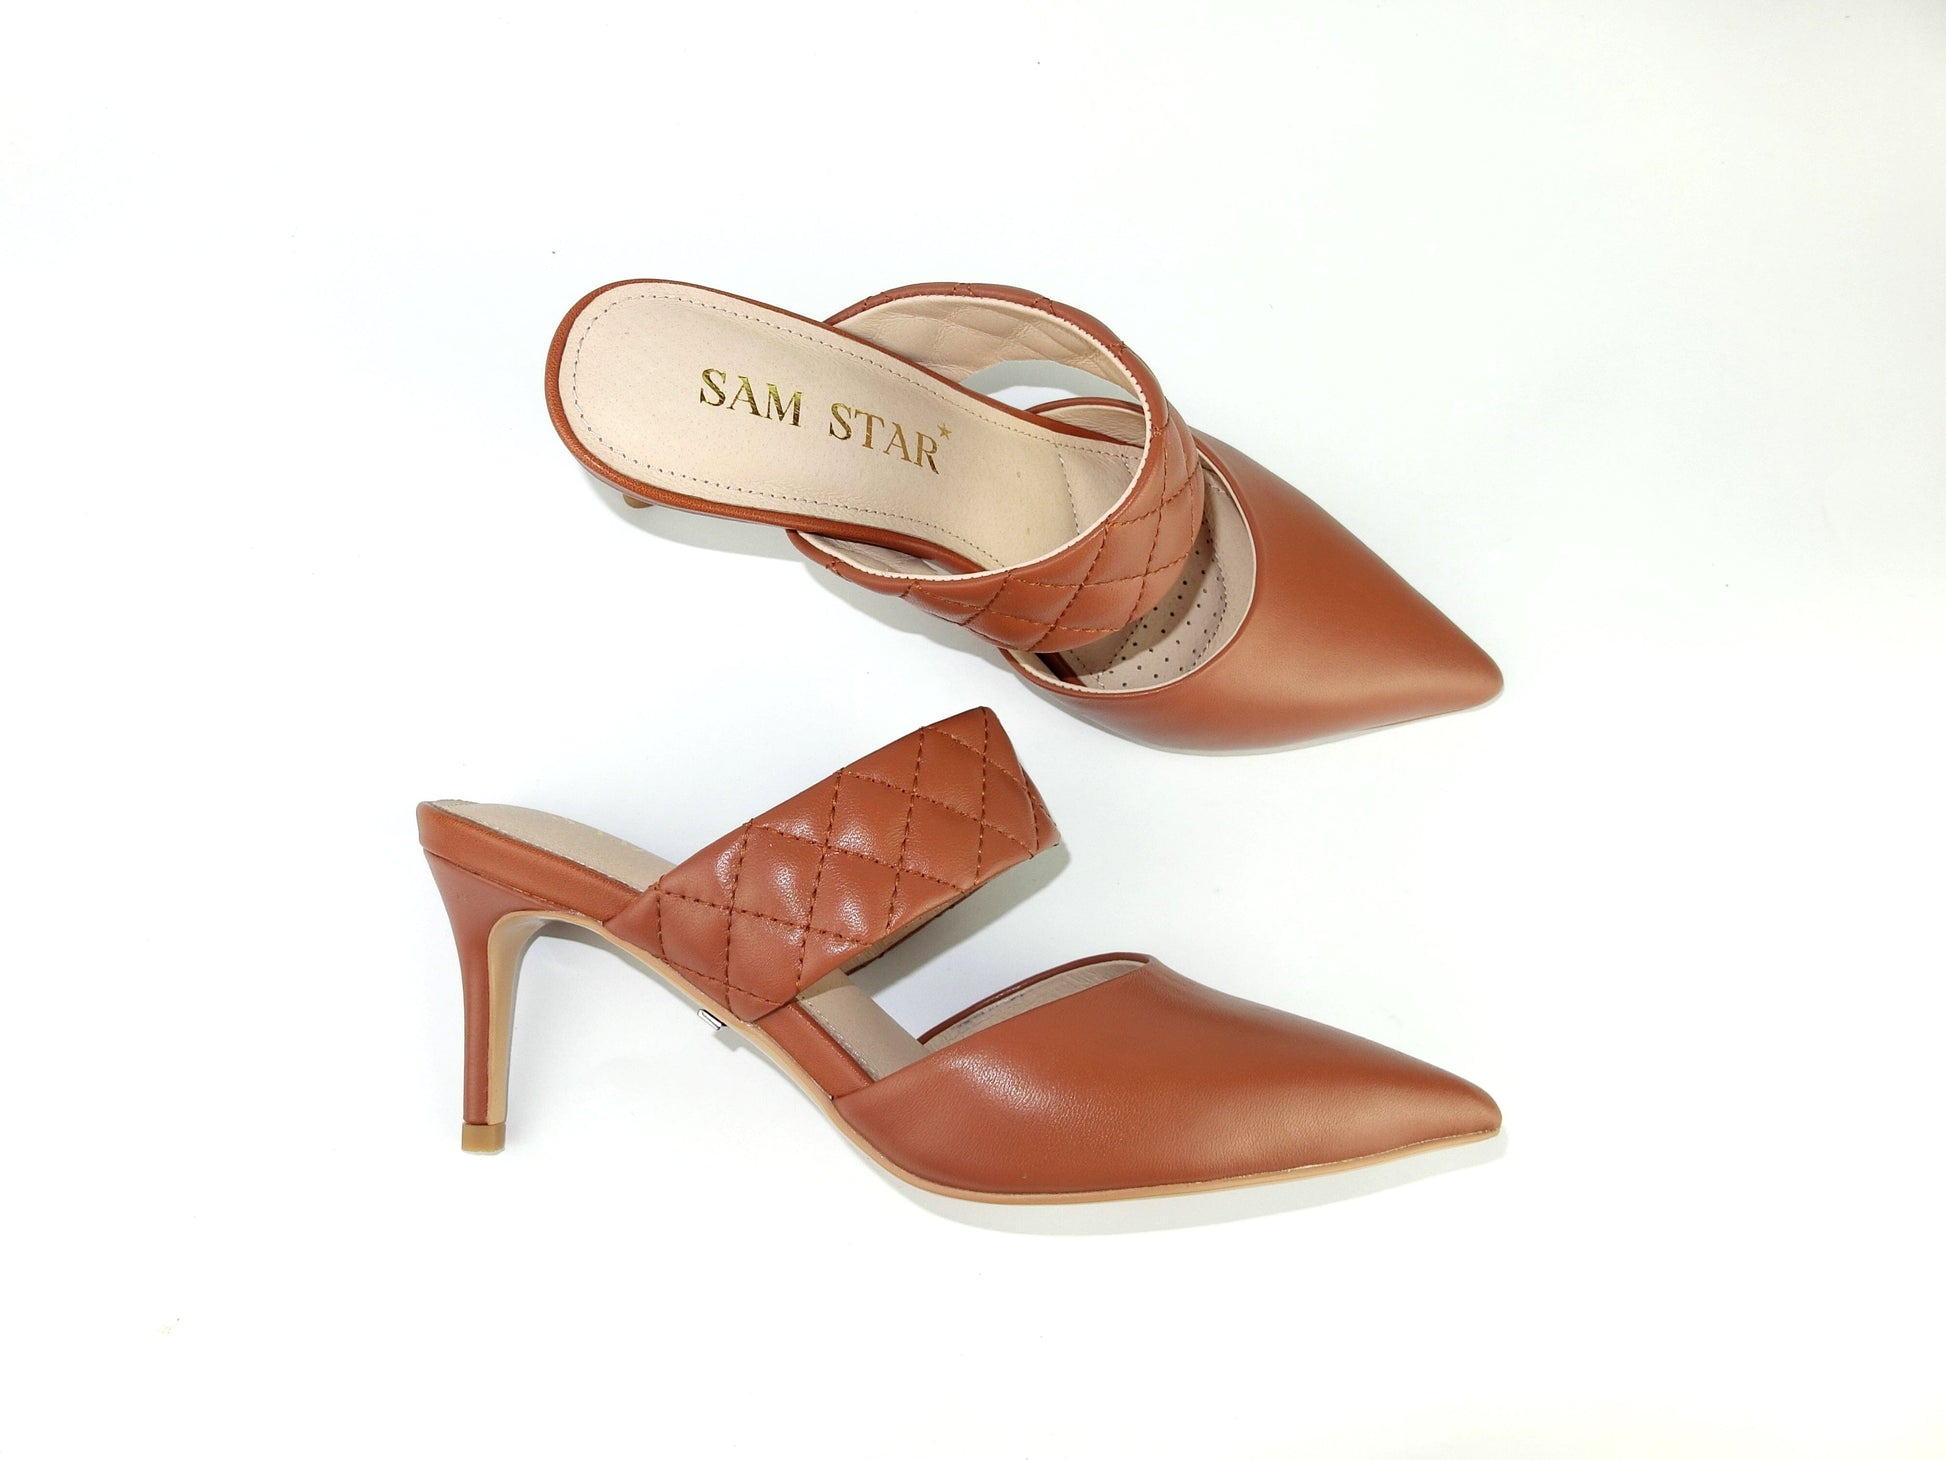 SS22015 Genuine leather court shoes in quilted detail in Tan ladies shoes Sam Star Shoes Tan 40/7 